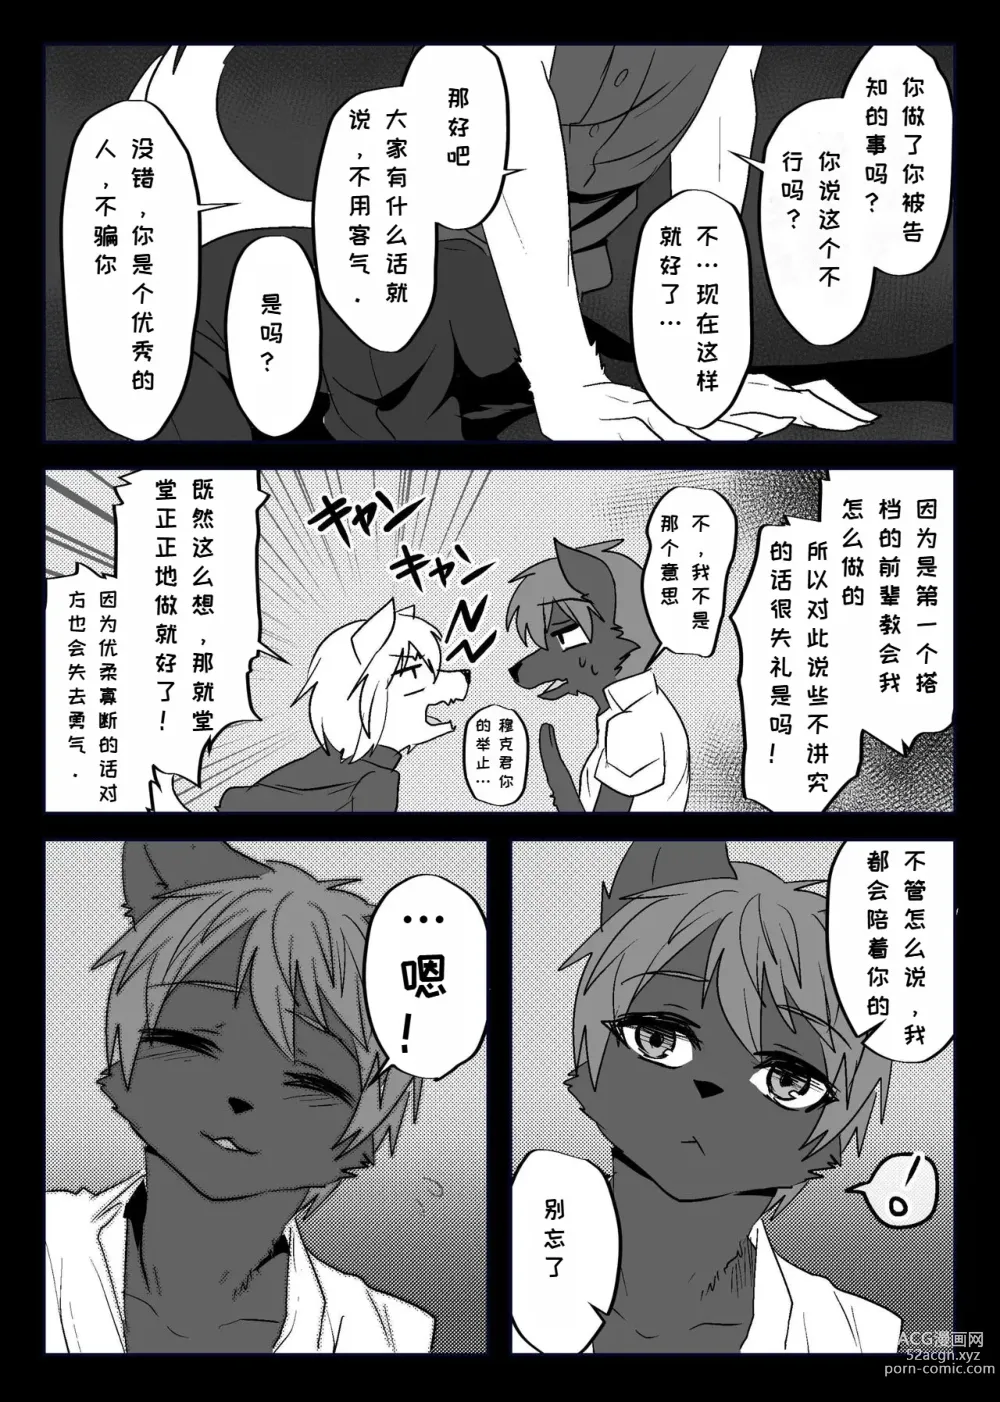 Page 16 of doujinshi 我们发情出勤科 2